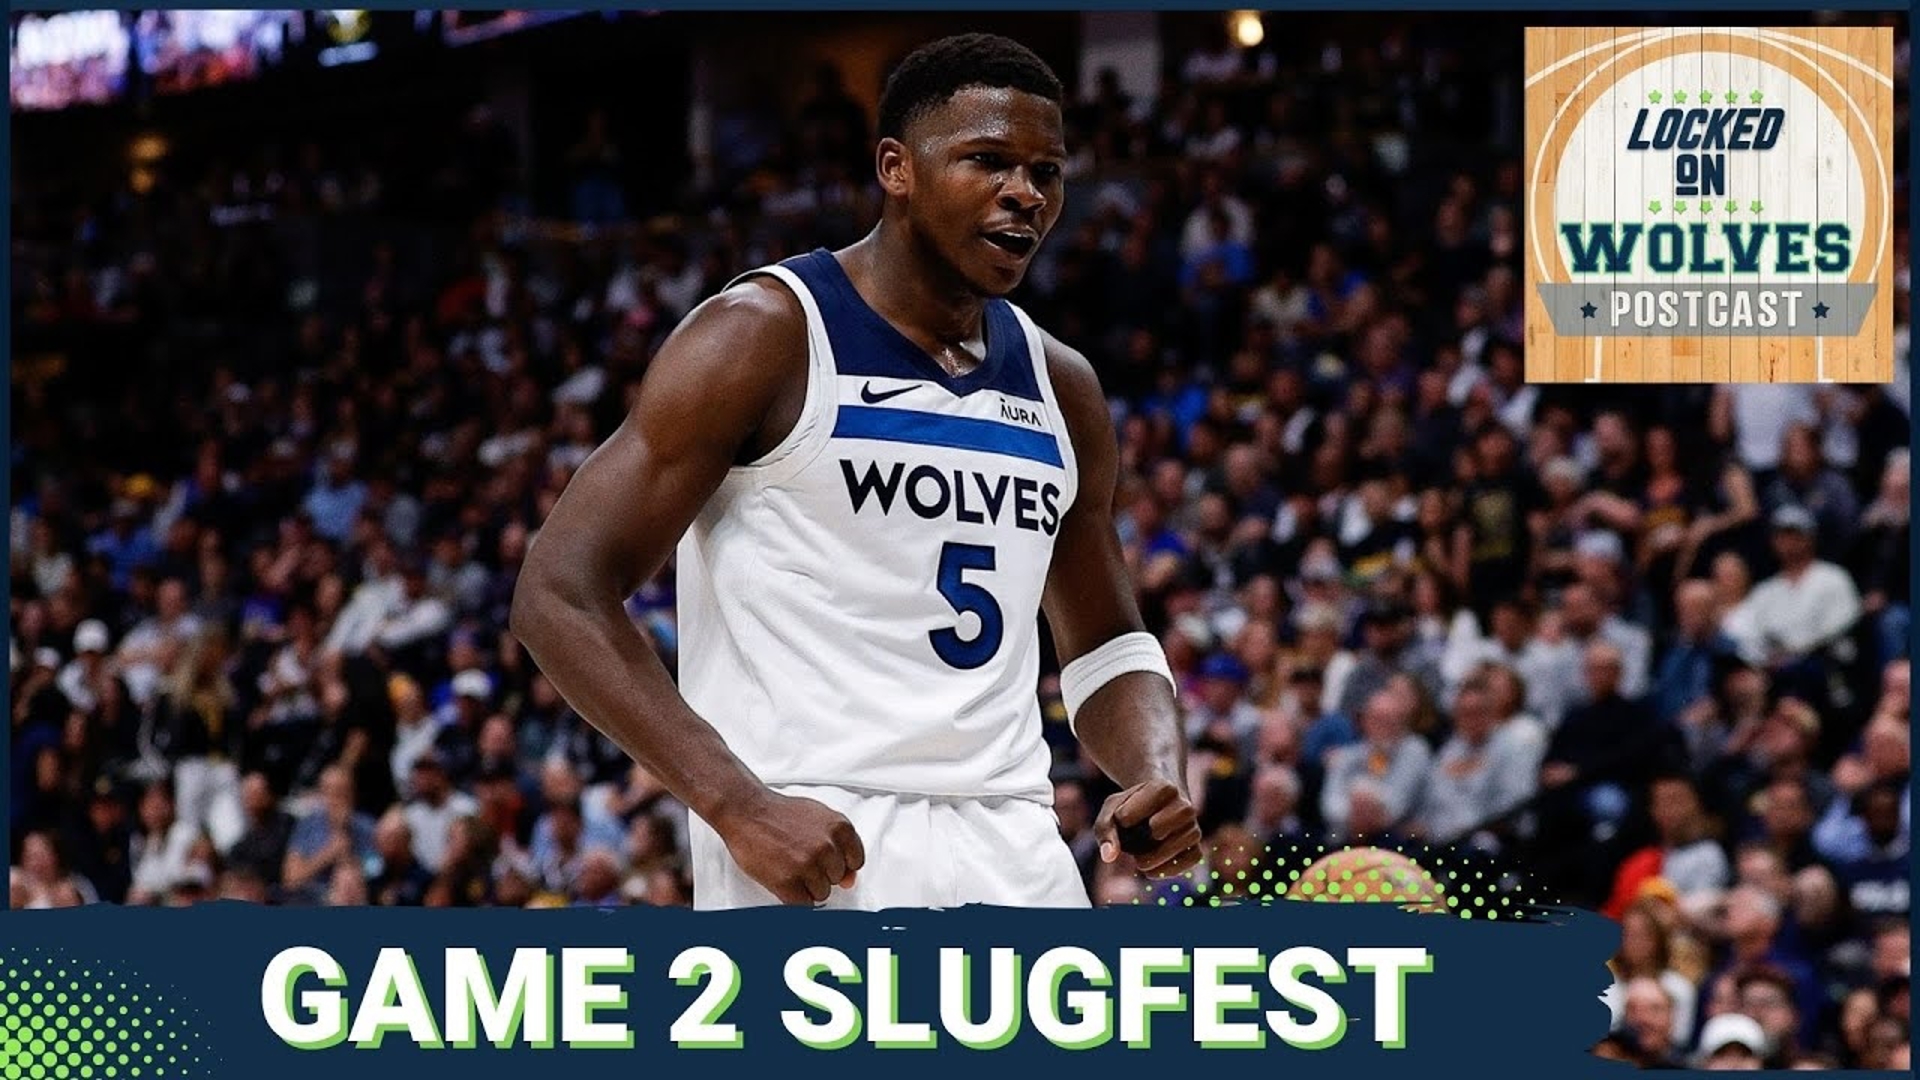 The Minnesota Timberwolves had the Denver Nuggets gasping for air after their 106-80 victory. Join Luke Inman and Jack Borman for the instant reaction.